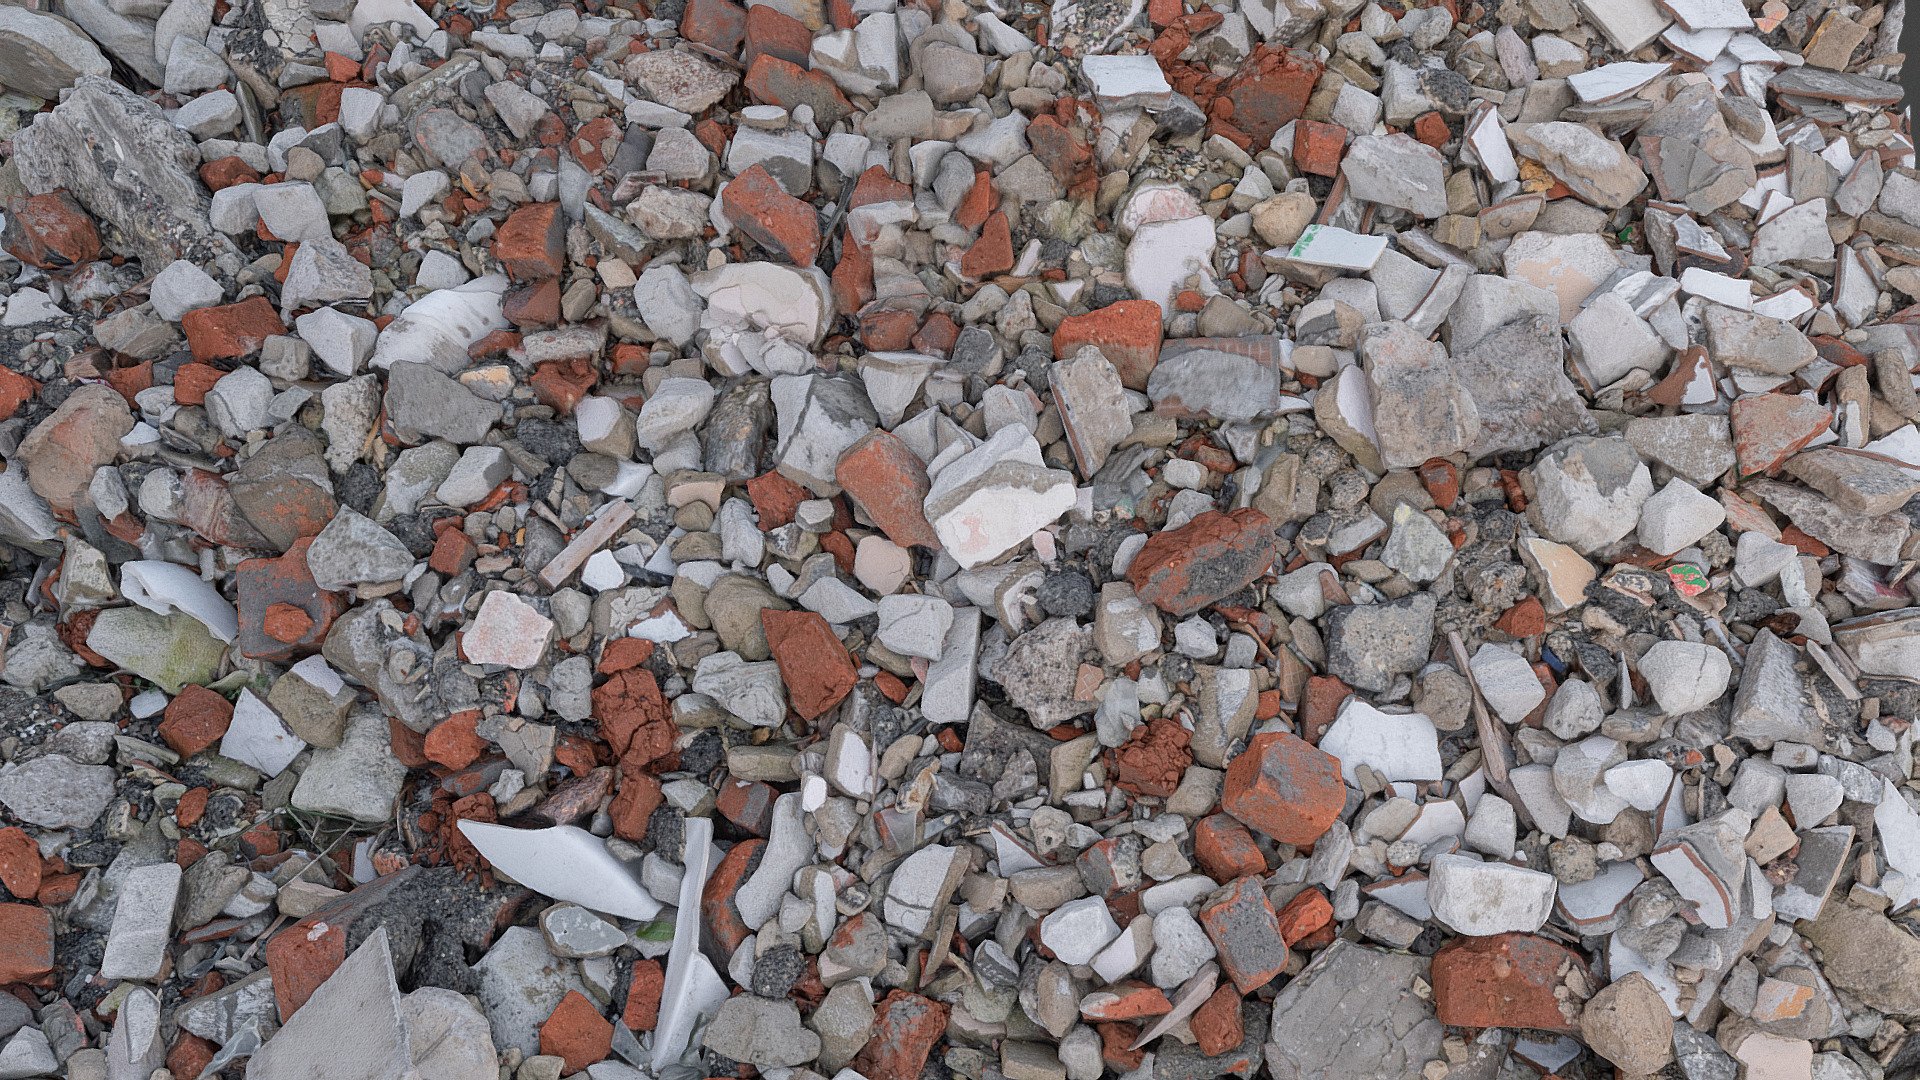 Concrete and bricks ruin Rubble ground, destreyed building junk waste yard

Photogrammetry scan 240x36MP, 3x8K texture - Rubble ground - Buy Royalty Free 3D model by axonite 3d model